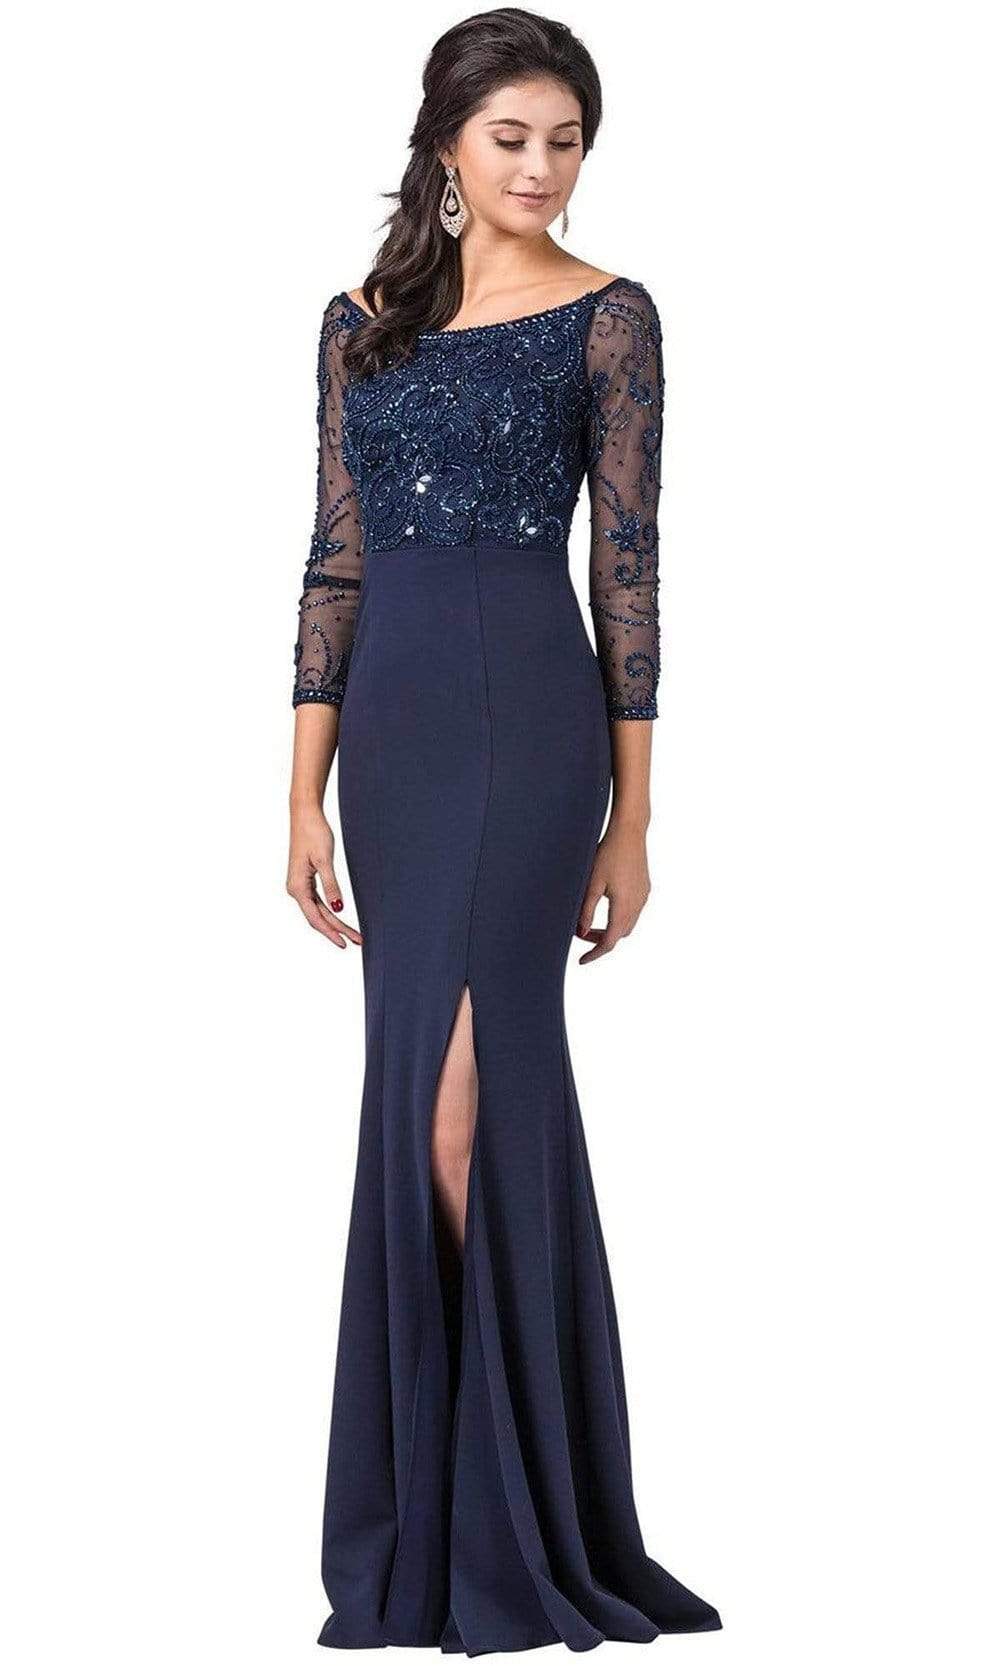 Dancing Queen - 2672 Embellished Long Sleeve Bateau Sheath Gown Special Occasion Dress XS / Navy